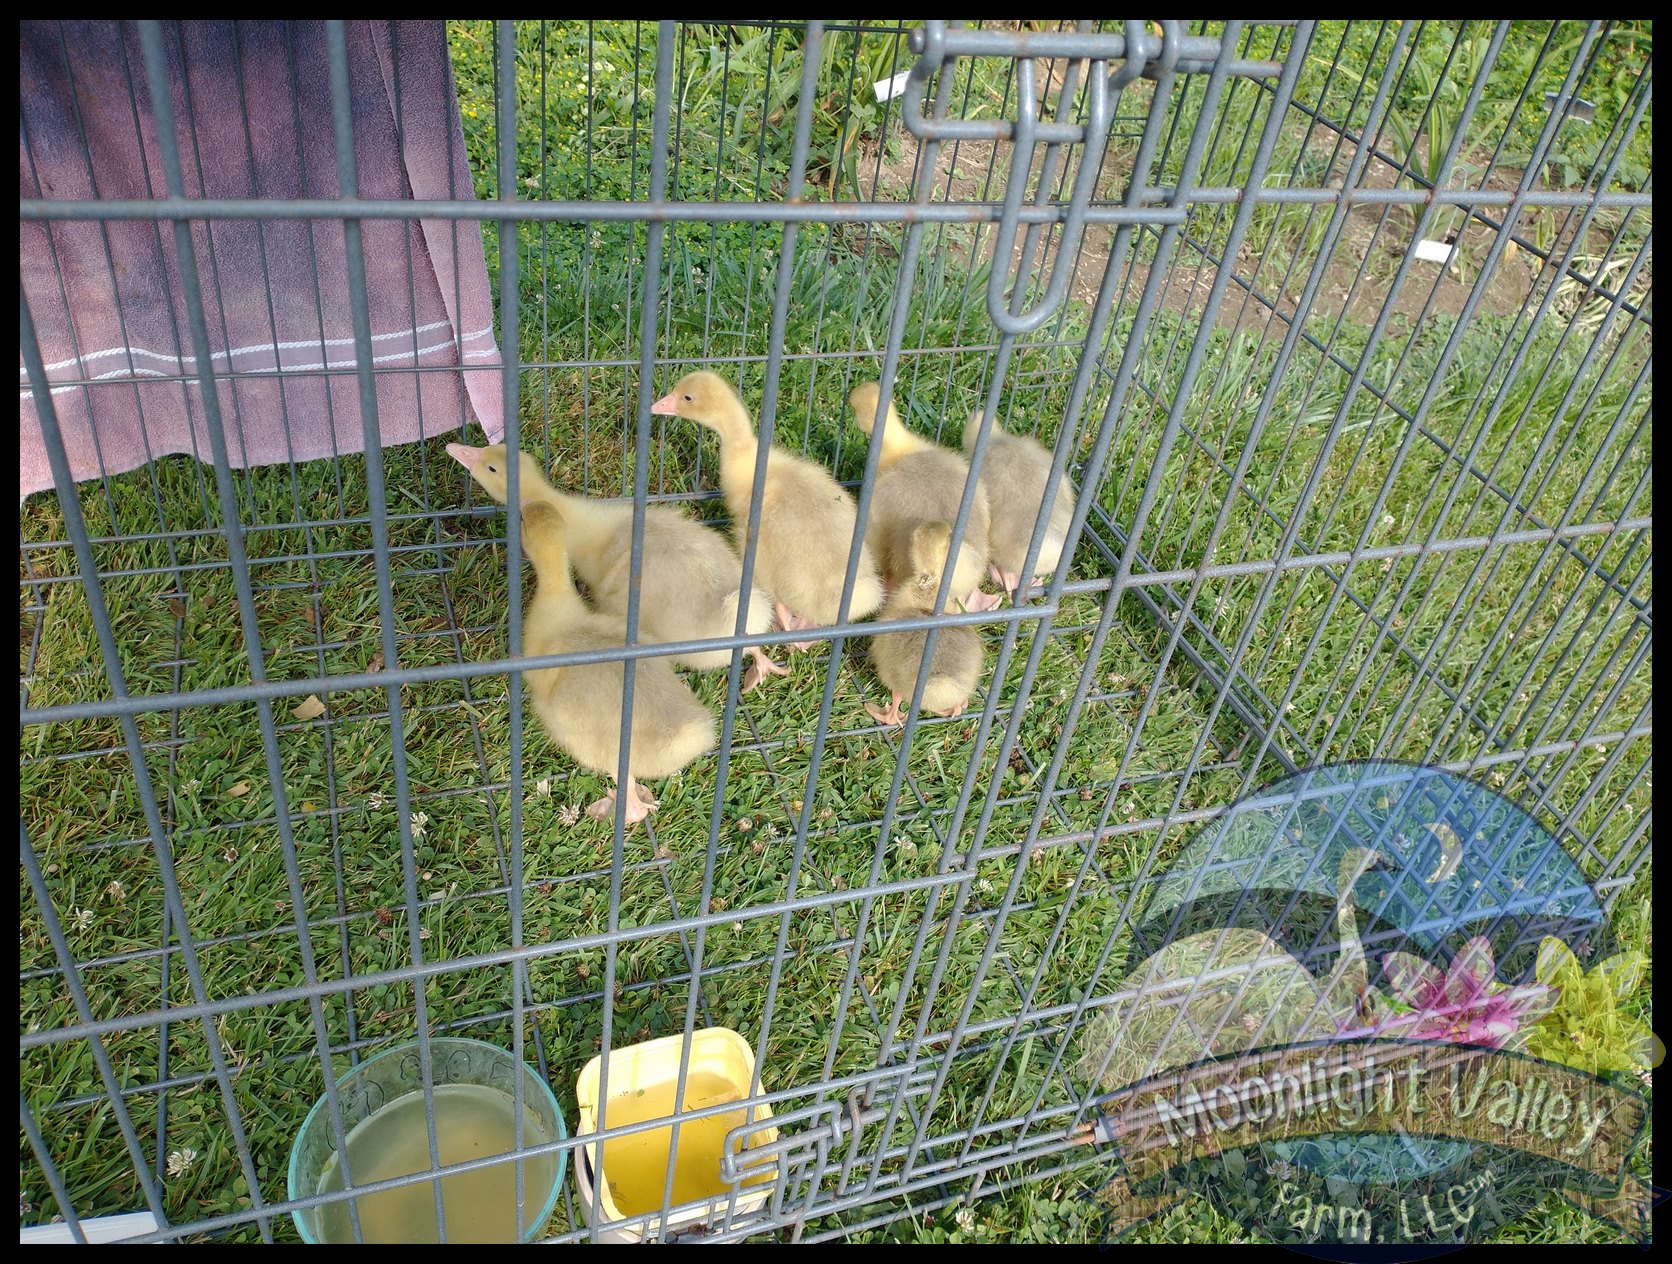 S e b a s t opol Gosling -STRAIGHT RUN**Pickup at the farm ONLY